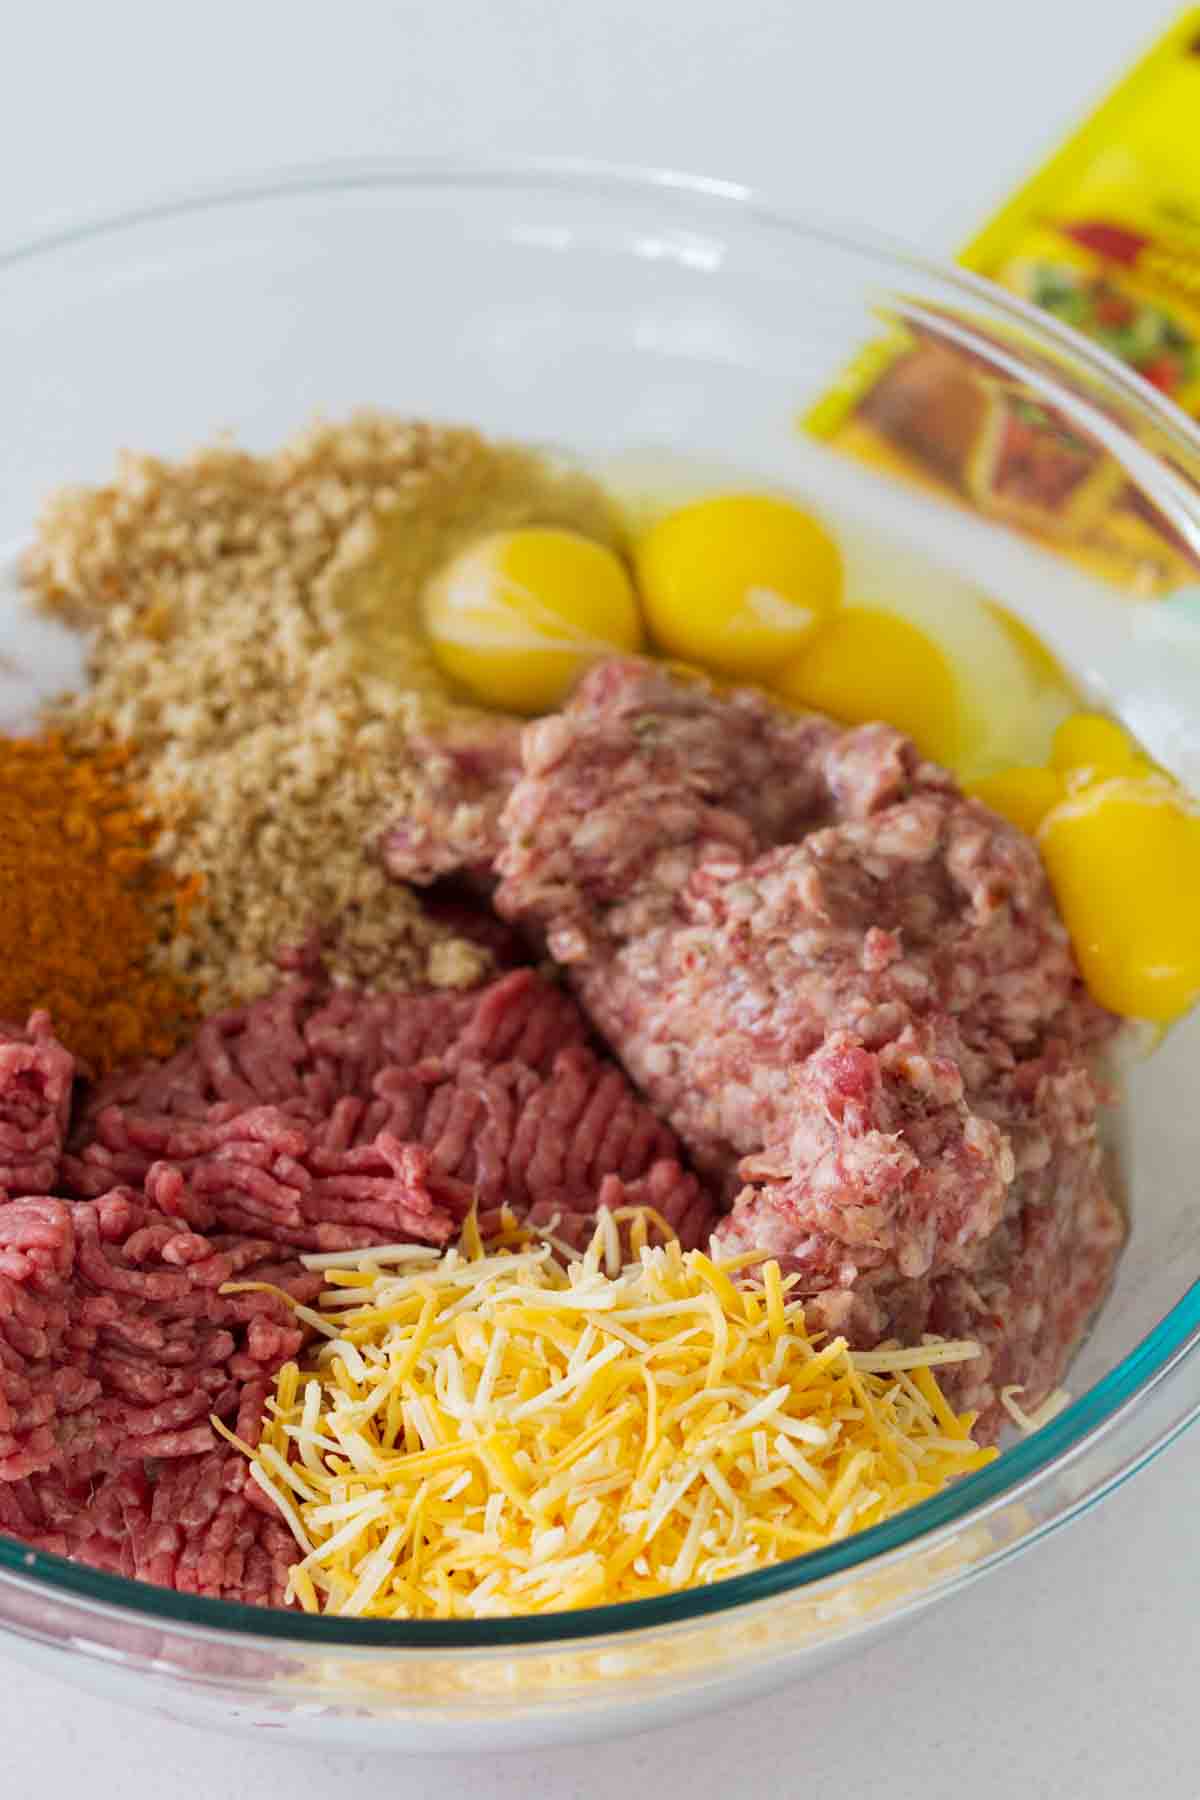 Meatball mixture for Mexican meatballs in a bowl.